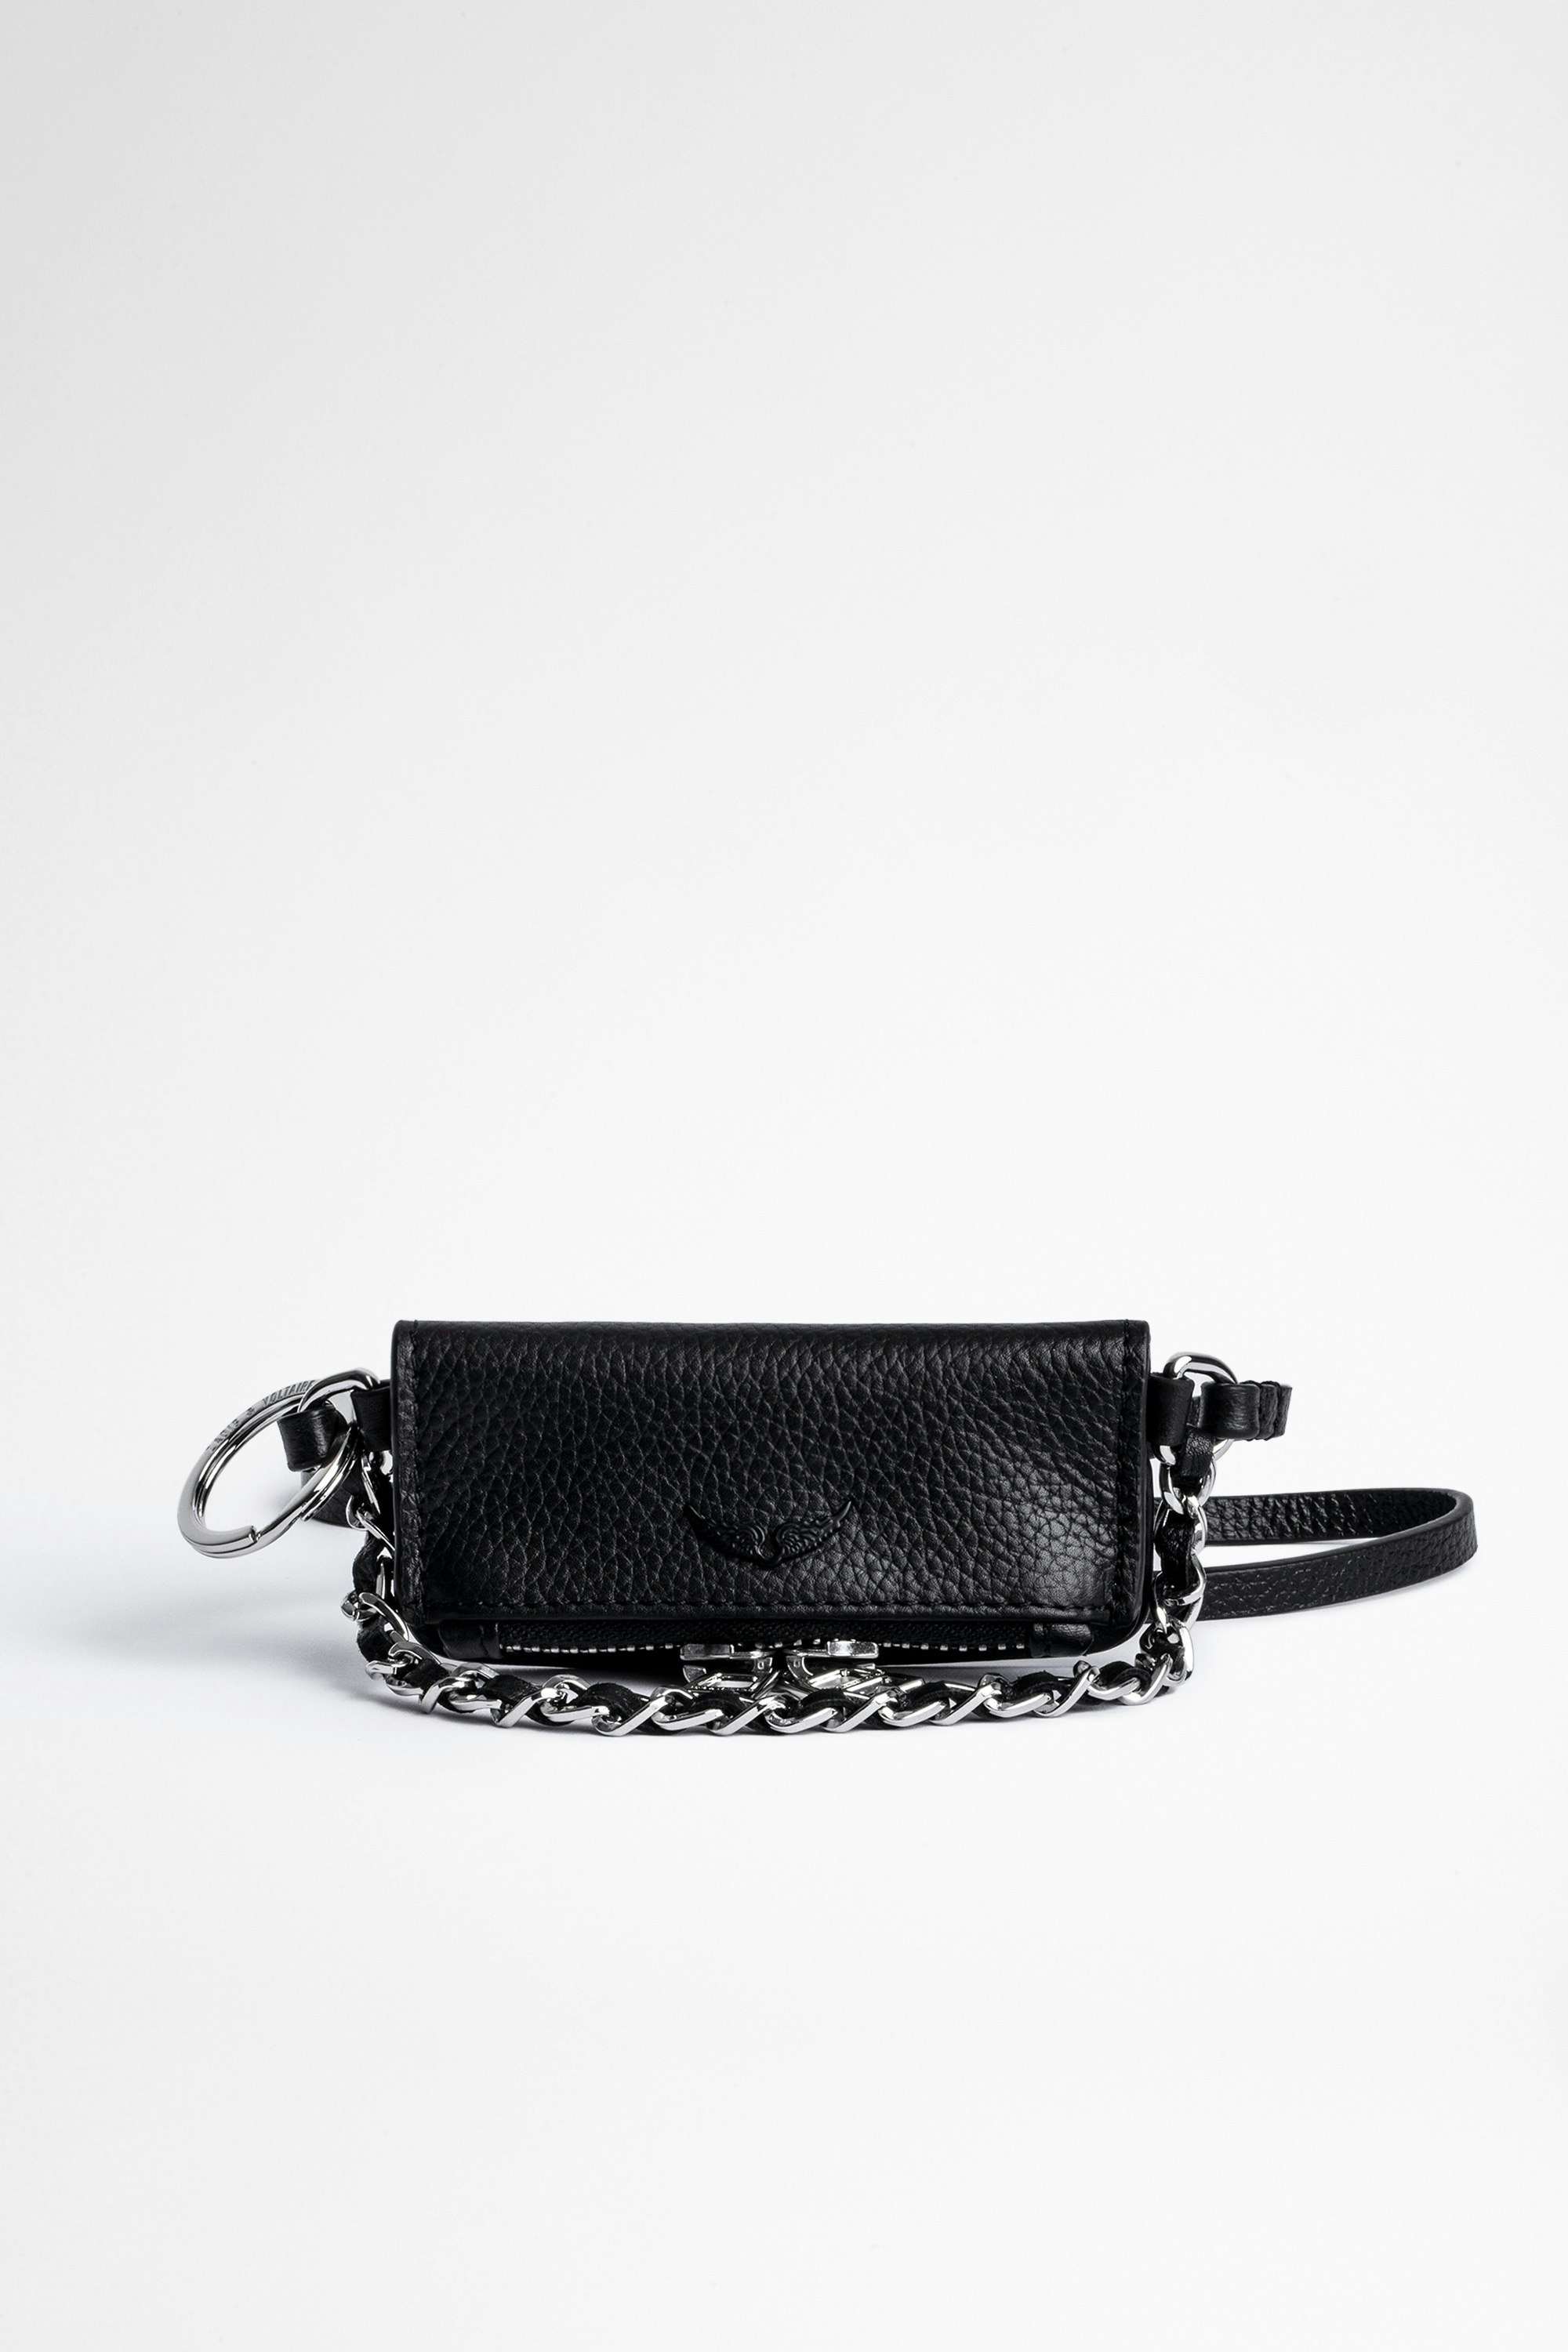 Grained Leather Grigri Rock Bag Miniature black leather version of the Rock clutch